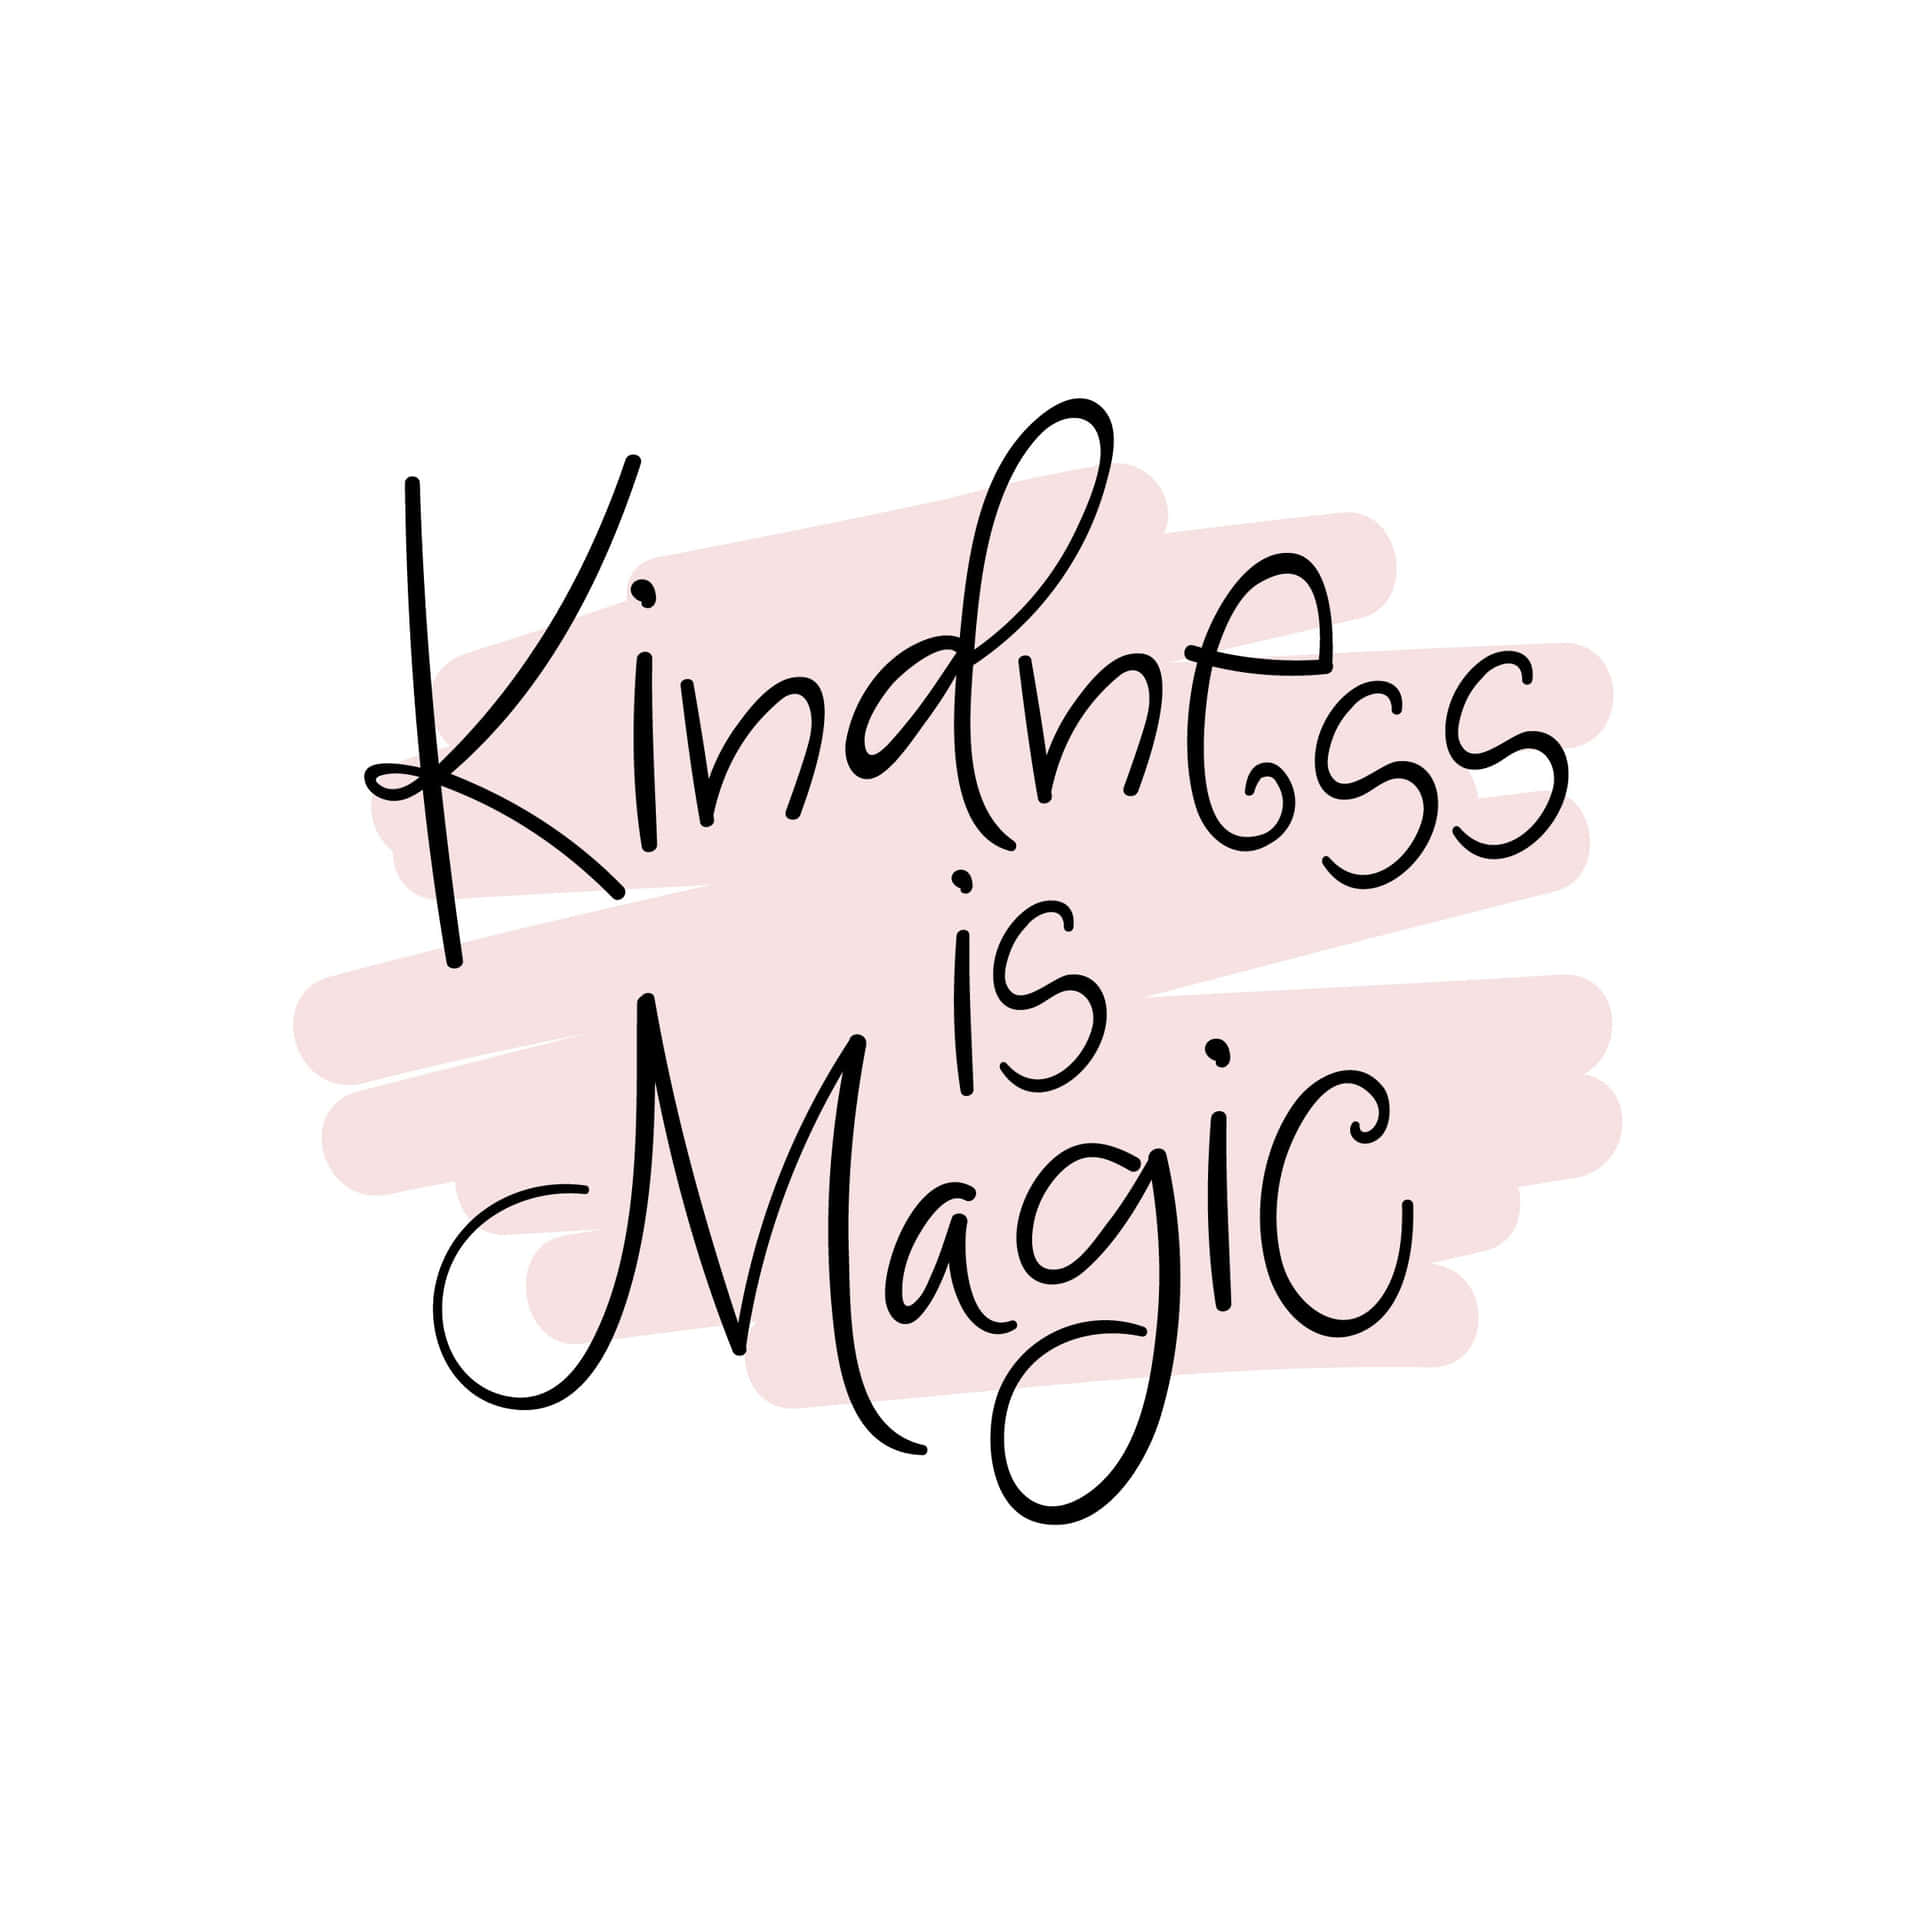 Kindness Magic Quote Pictures